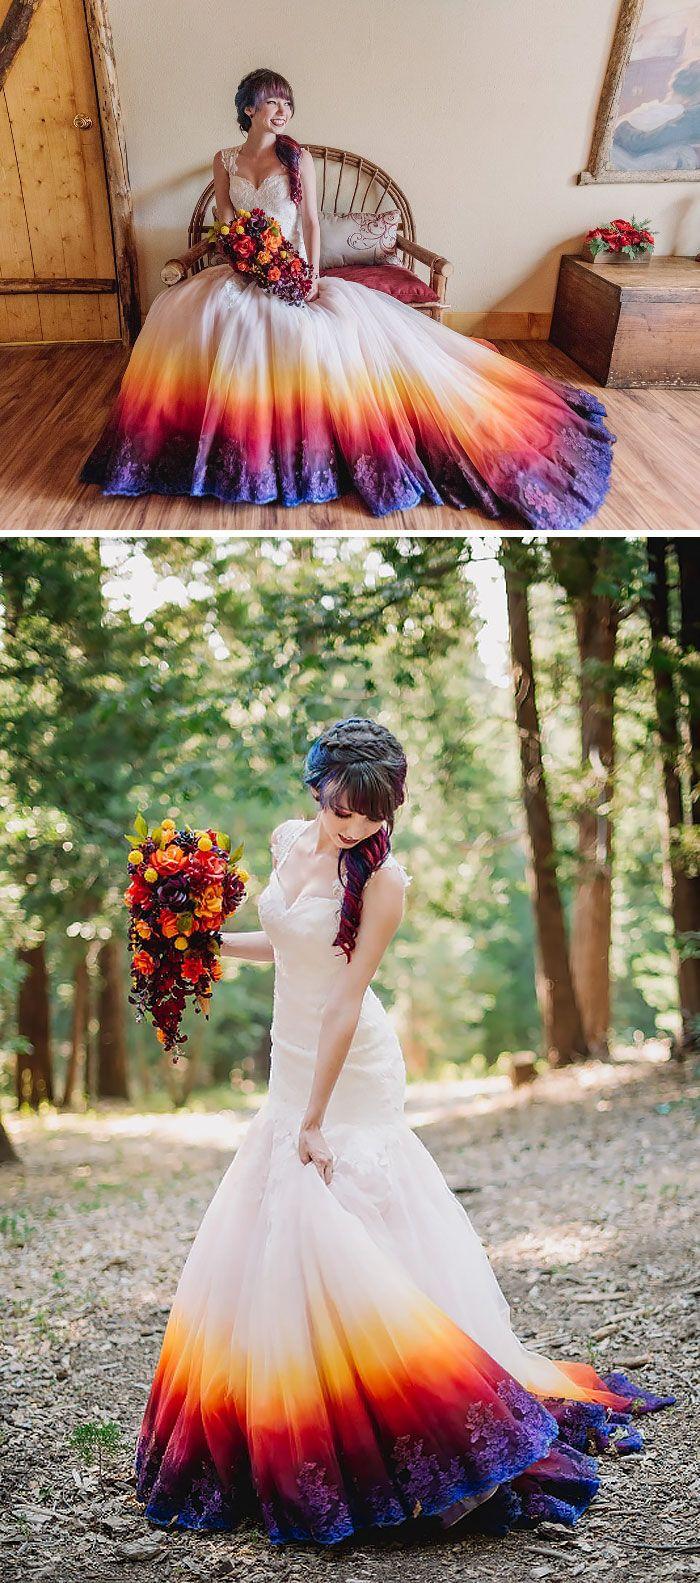 Wedding - Dip Dye Wedding Dress Trend Will Make Your Big Day More Colorful